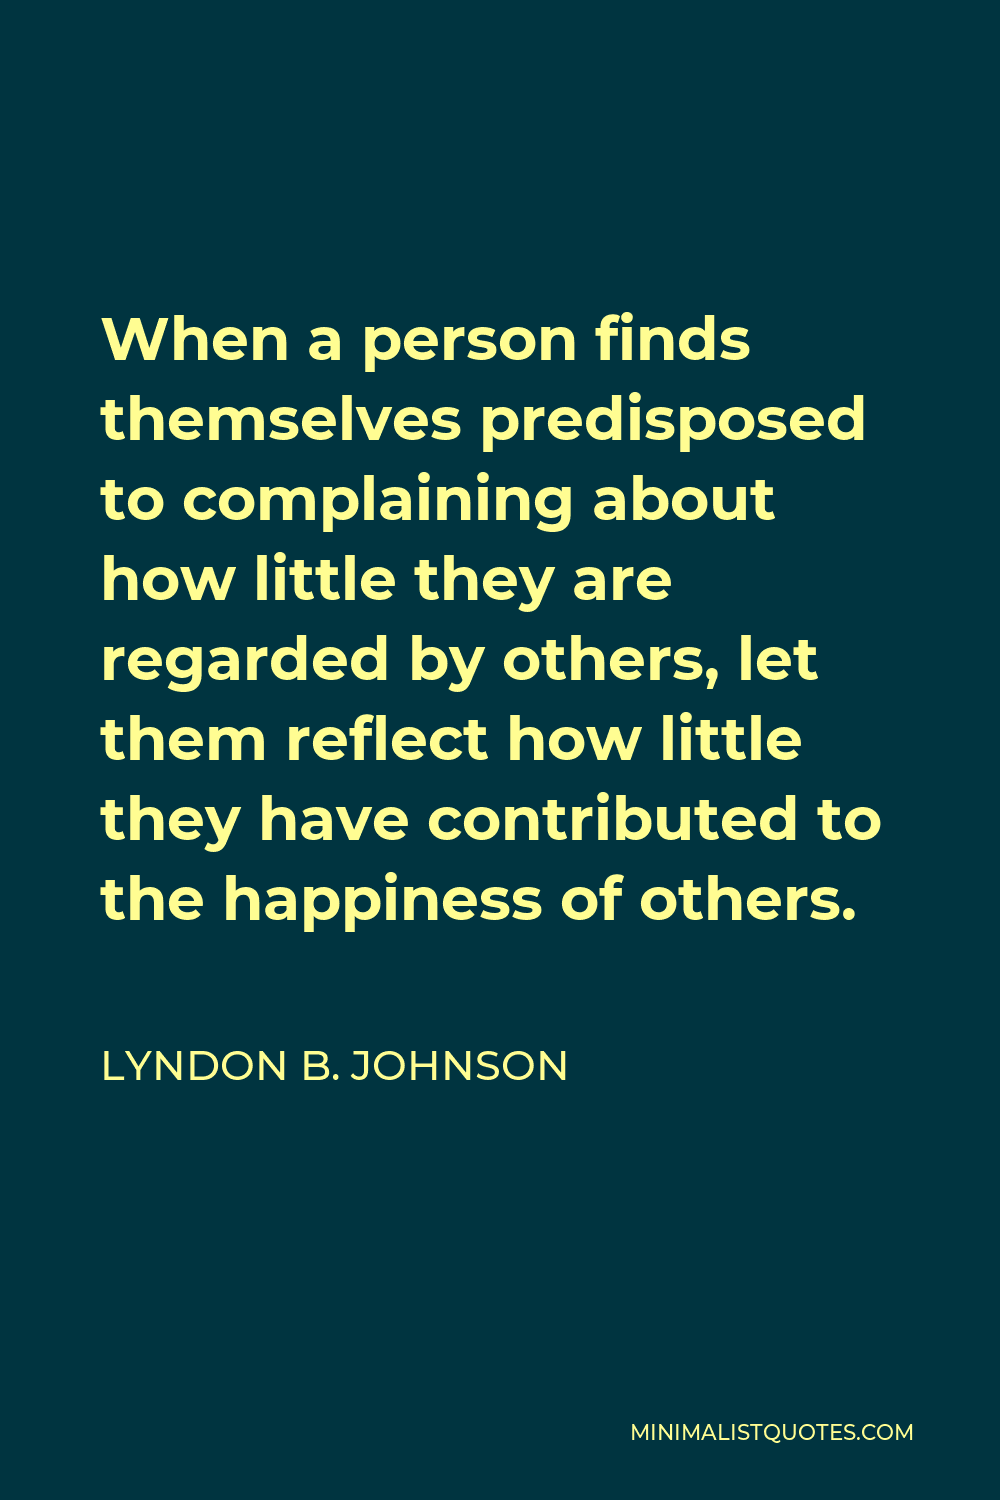 Lyndon B. Johnson Quote - When a person finds themselves predisposed to complaining about how little they are regarded by others, let them reflect how little they have contributed to the happiness of others.